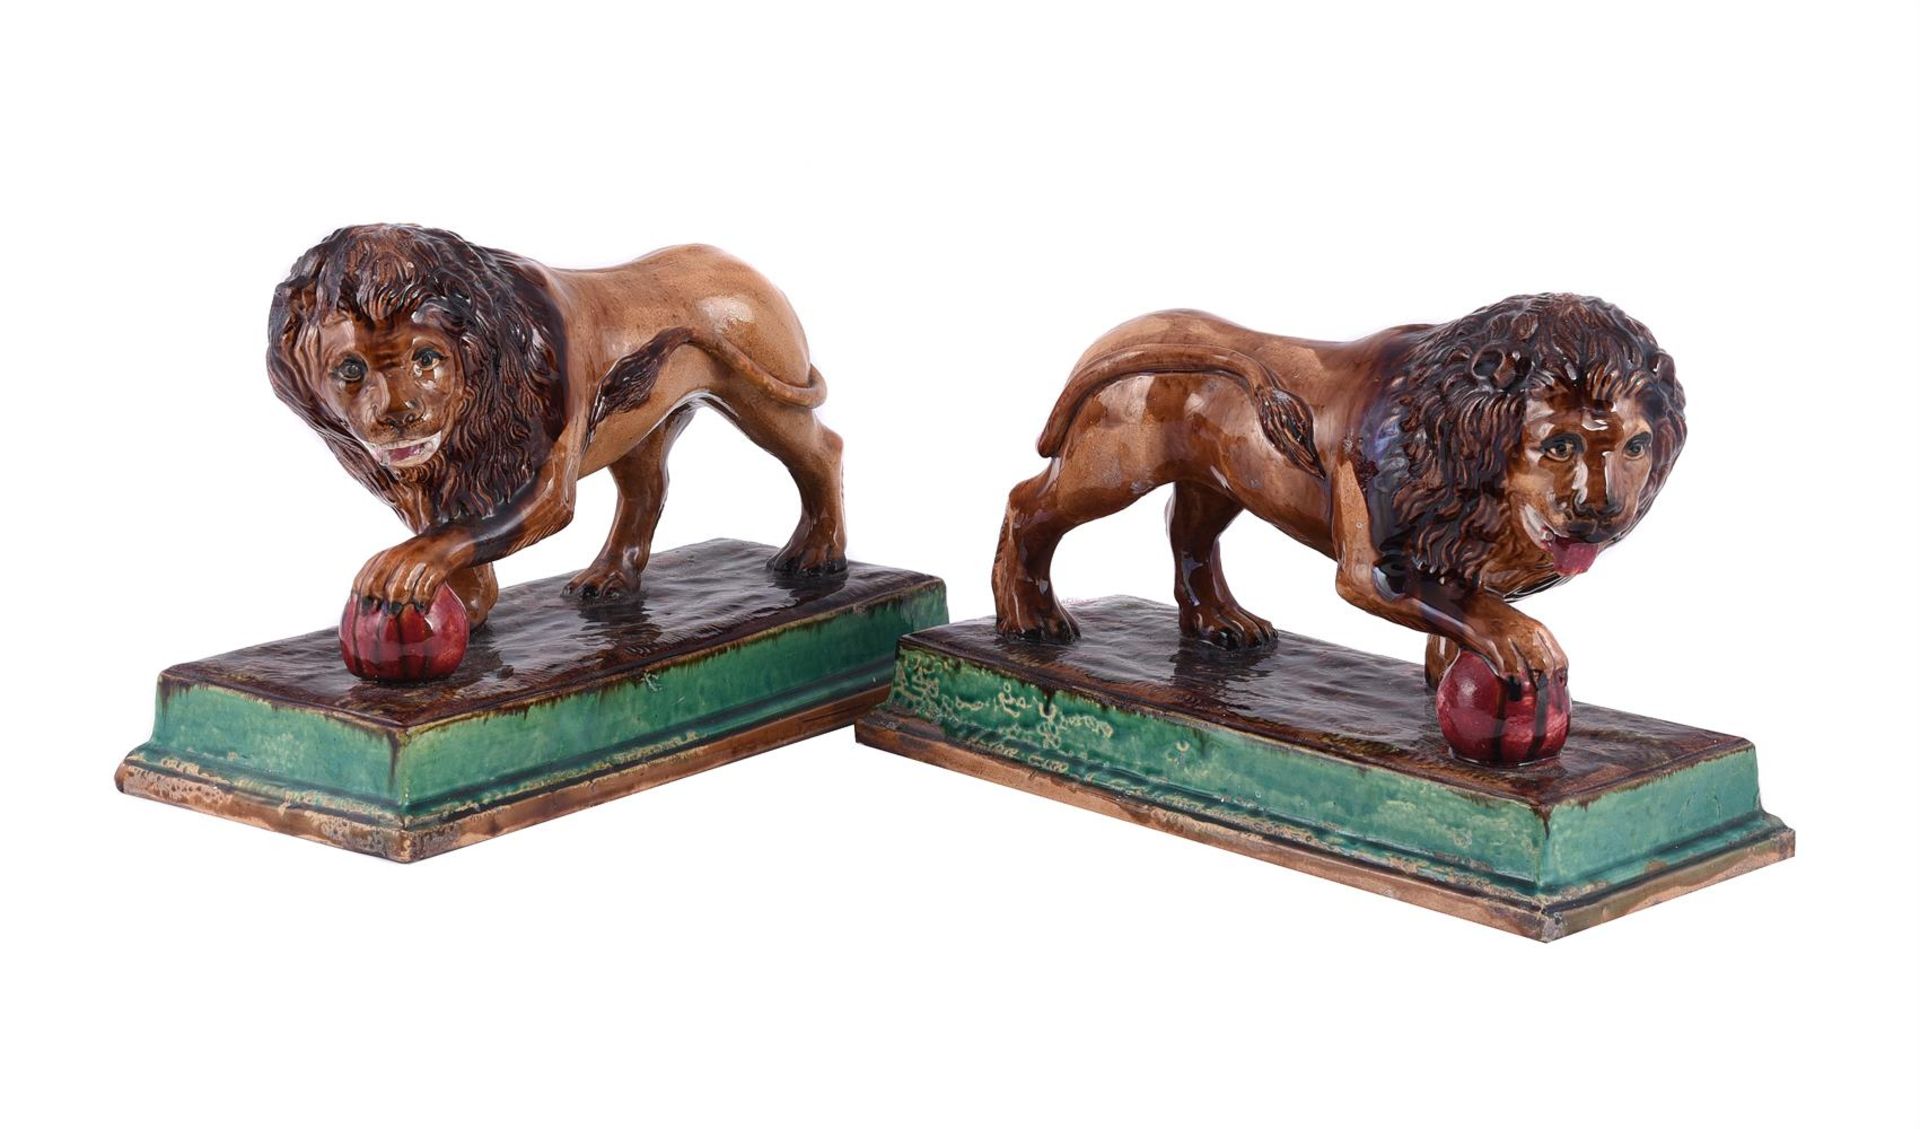 A PAIR OF GEORGE SKEY, WILNECOTE WORKS, TAMWORTH MAJOLICA MODELS OF MEDICI LIONS, LATE 19TH CENTURY